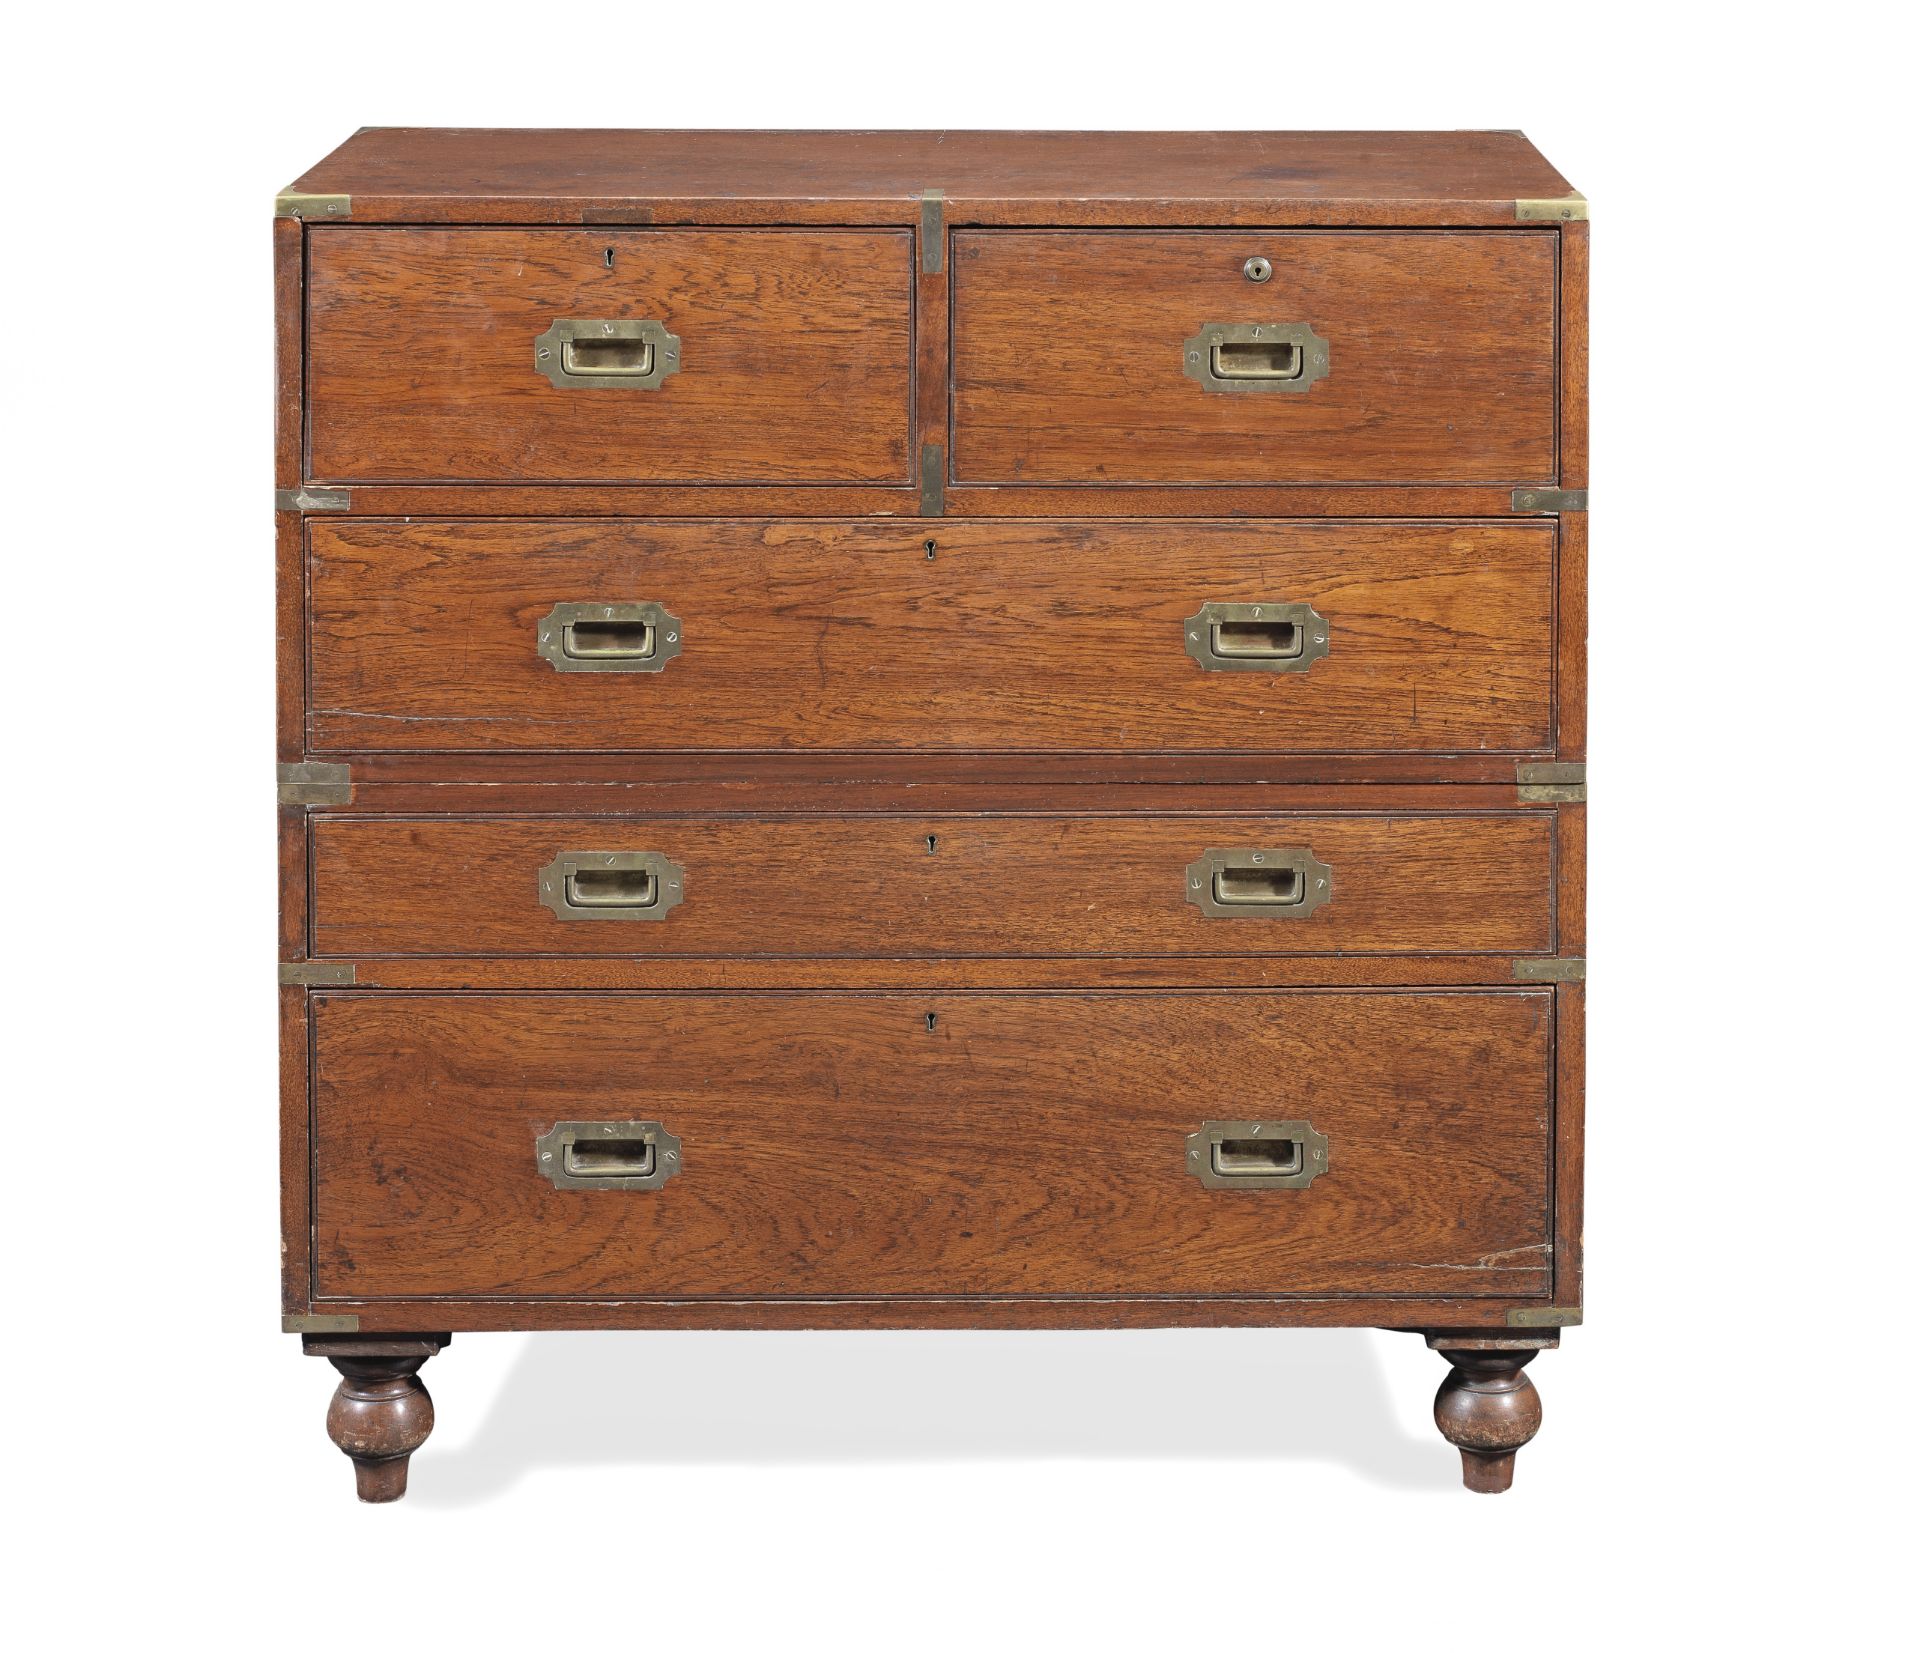 A Victorian teak and brass mounted secretaire campaign chest